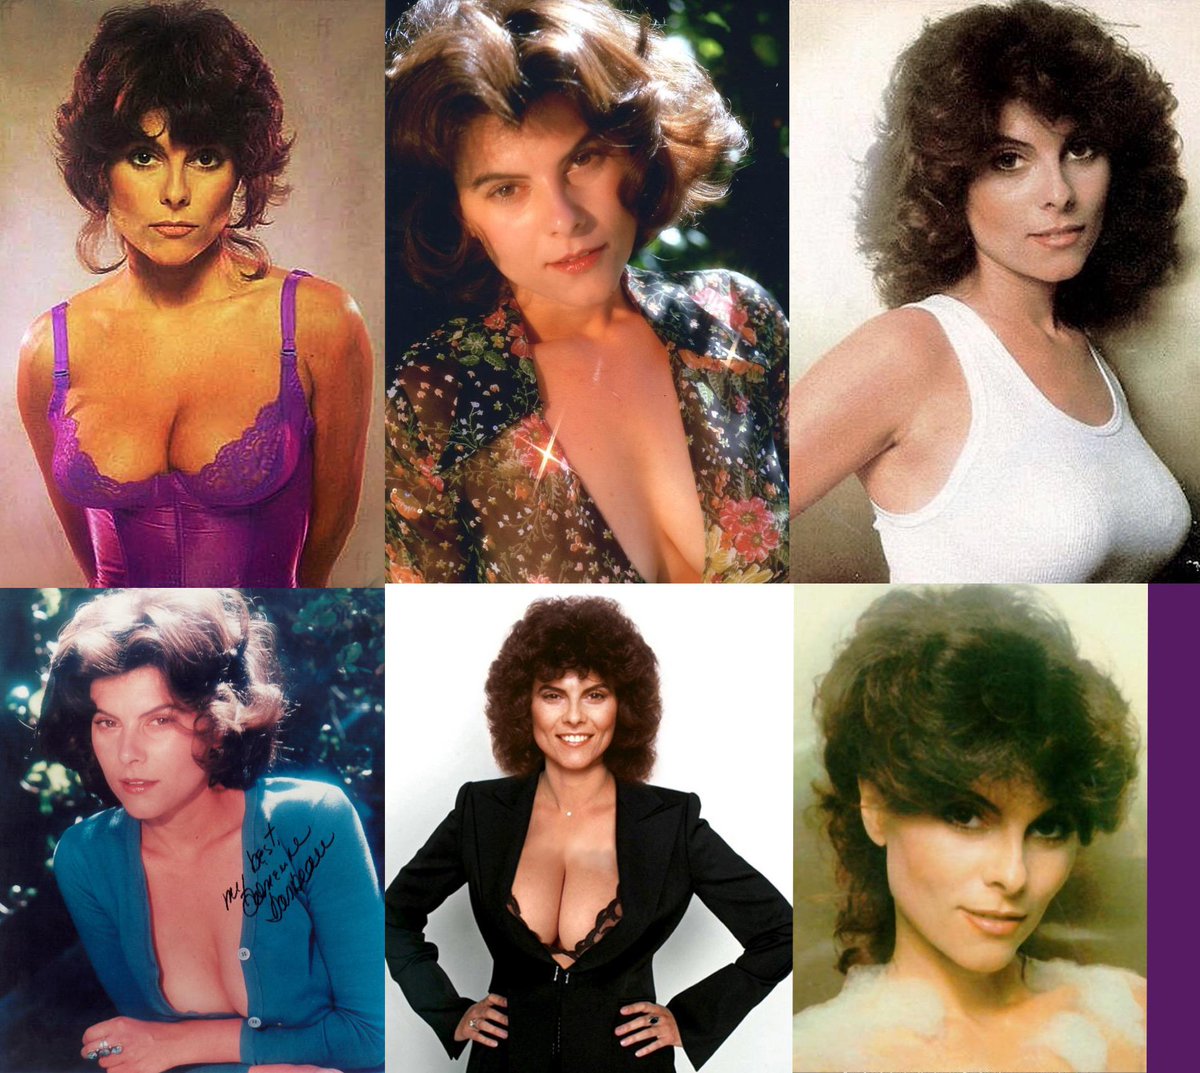 Happy 76th birthday Adrienne Barbeau May she have many more.